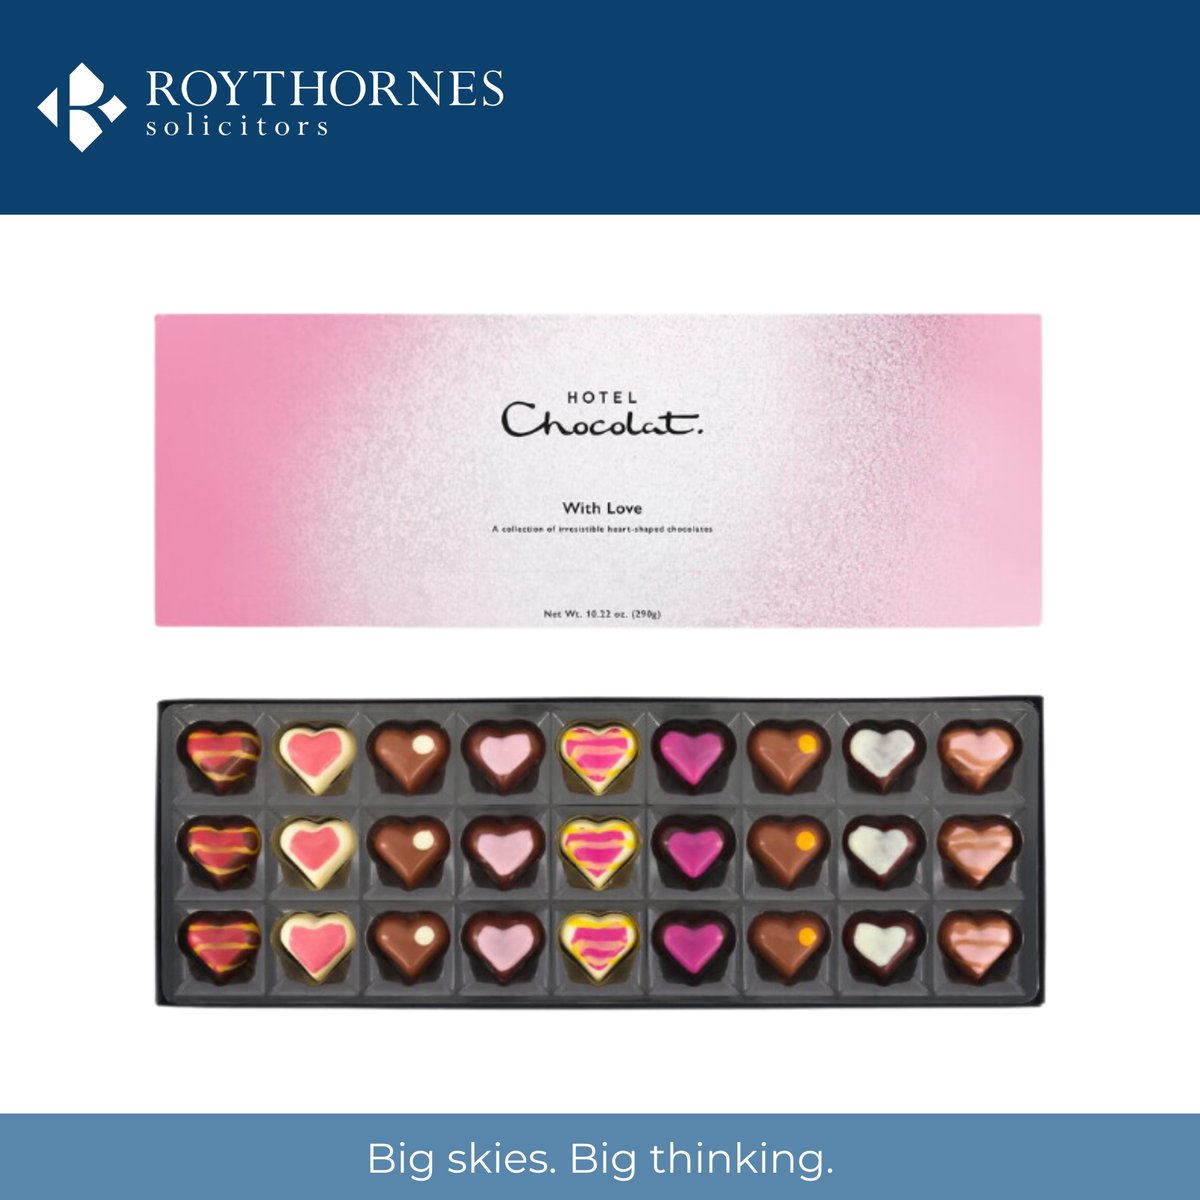 Happy #ValentinesDay! 💙 Take a look at our LinkedIn page to take part in our Valentines #giveaway! Win a box of @HotelChocolat by entering our #competition. ➡️ linkedin.com/feed/update/ur…